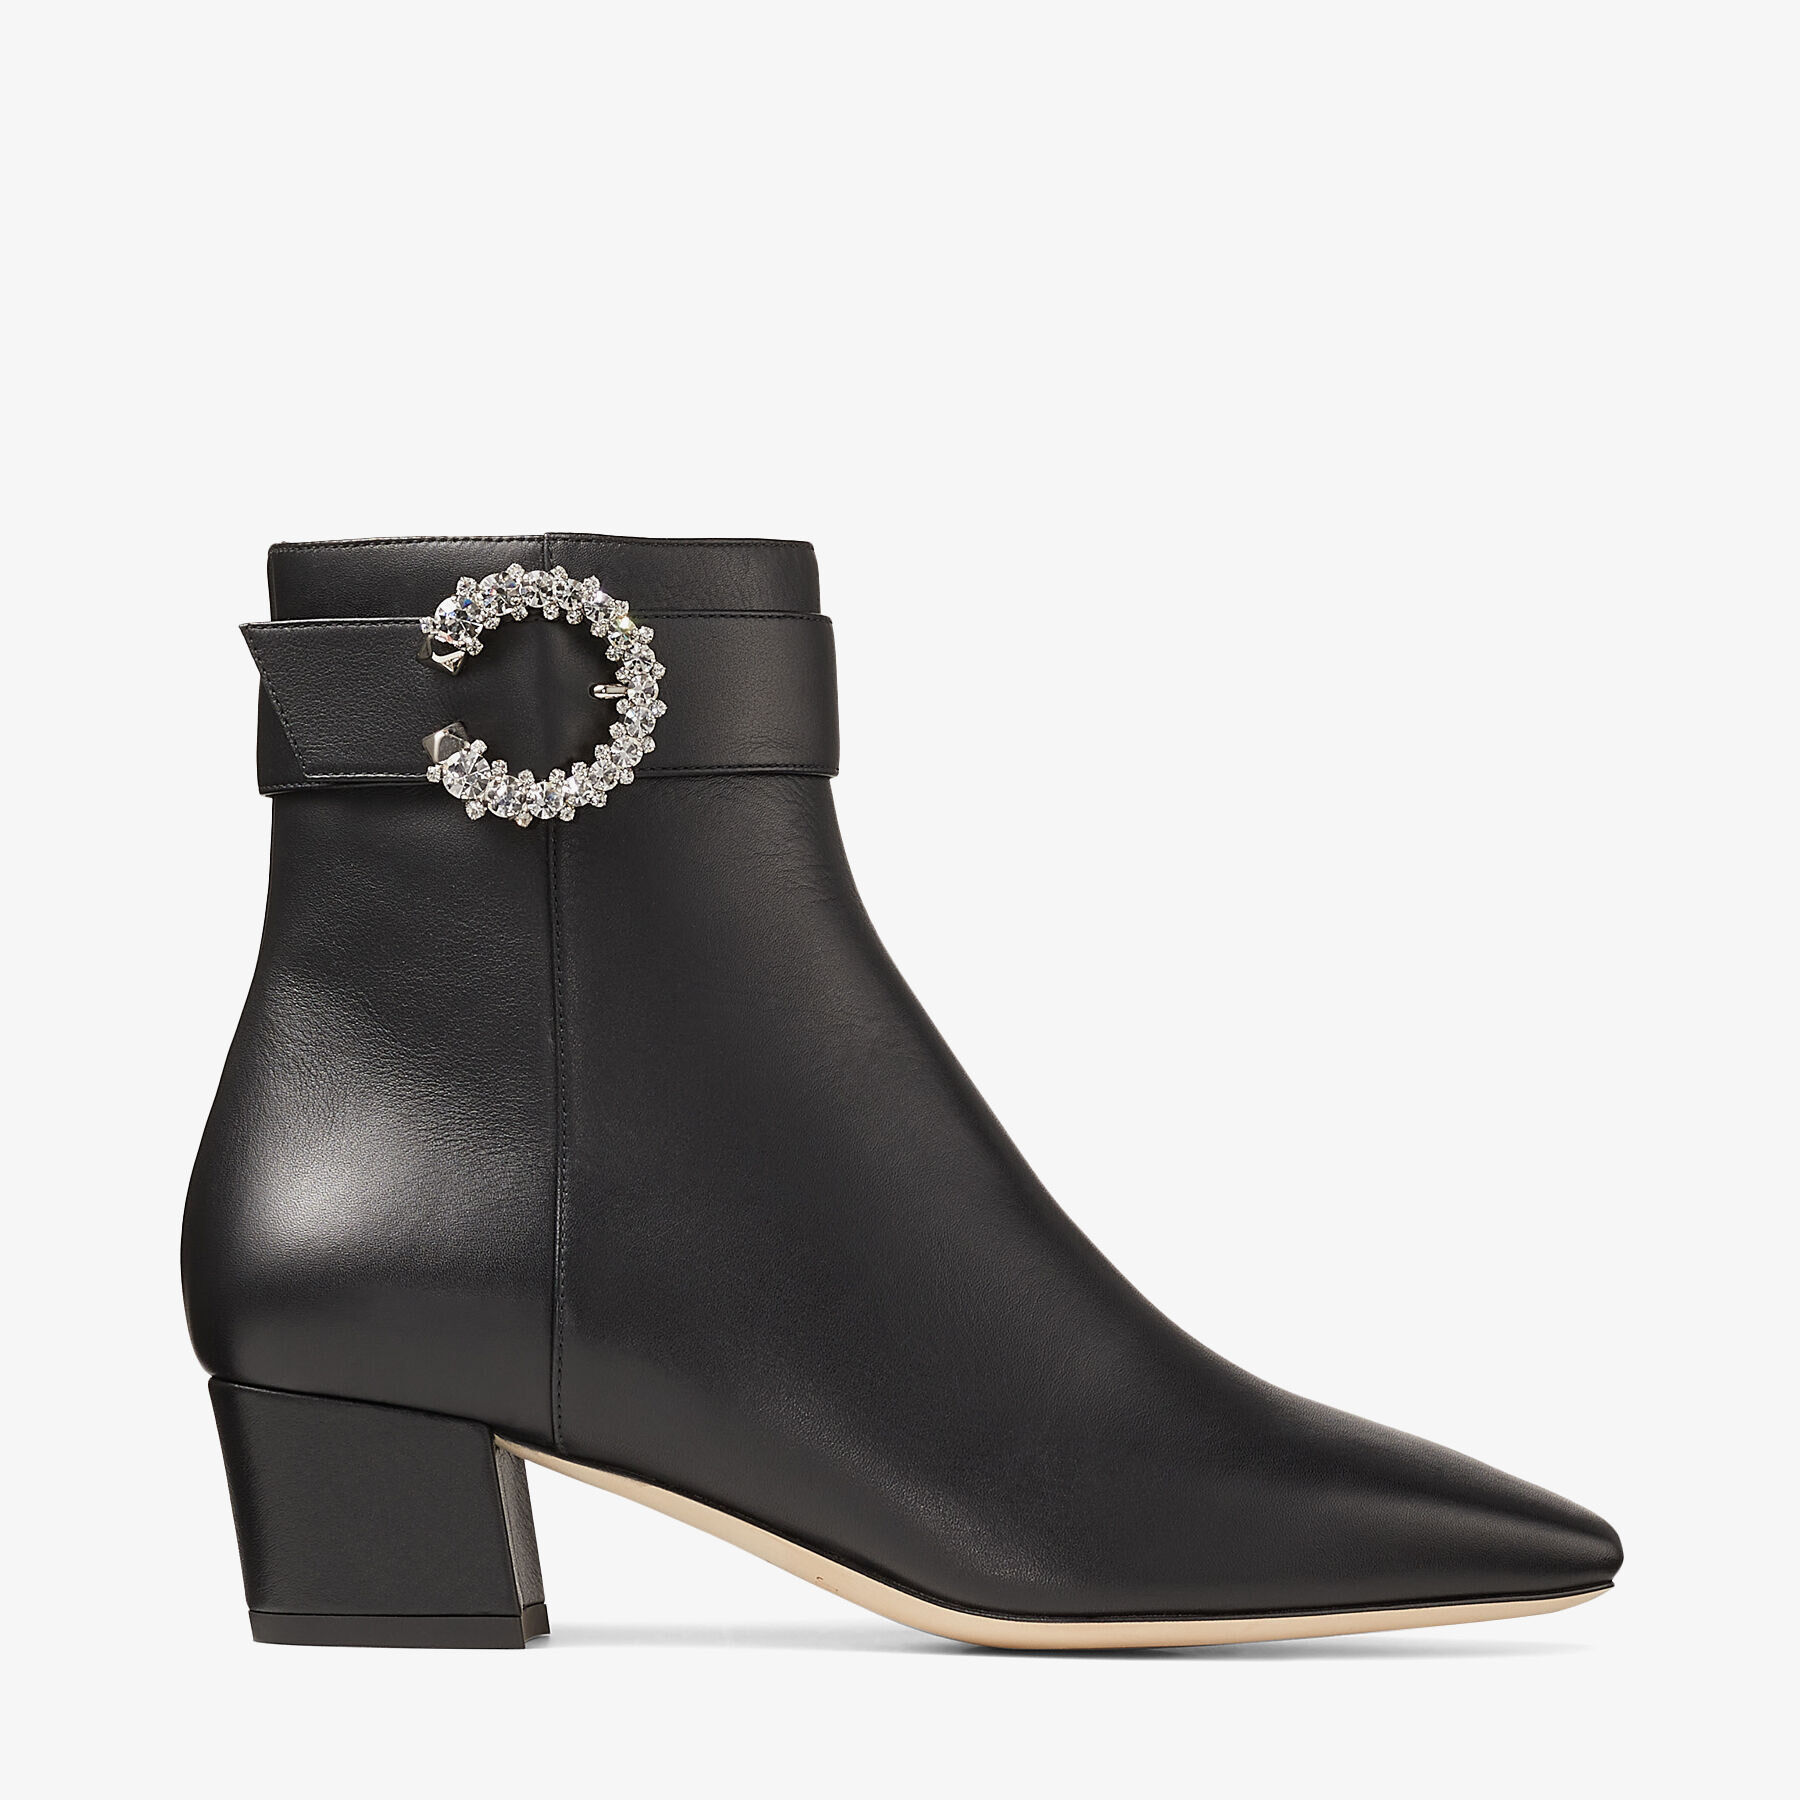 Black Smooth Leather Ankle Boots with Crystal Buckle | MYAN 45 